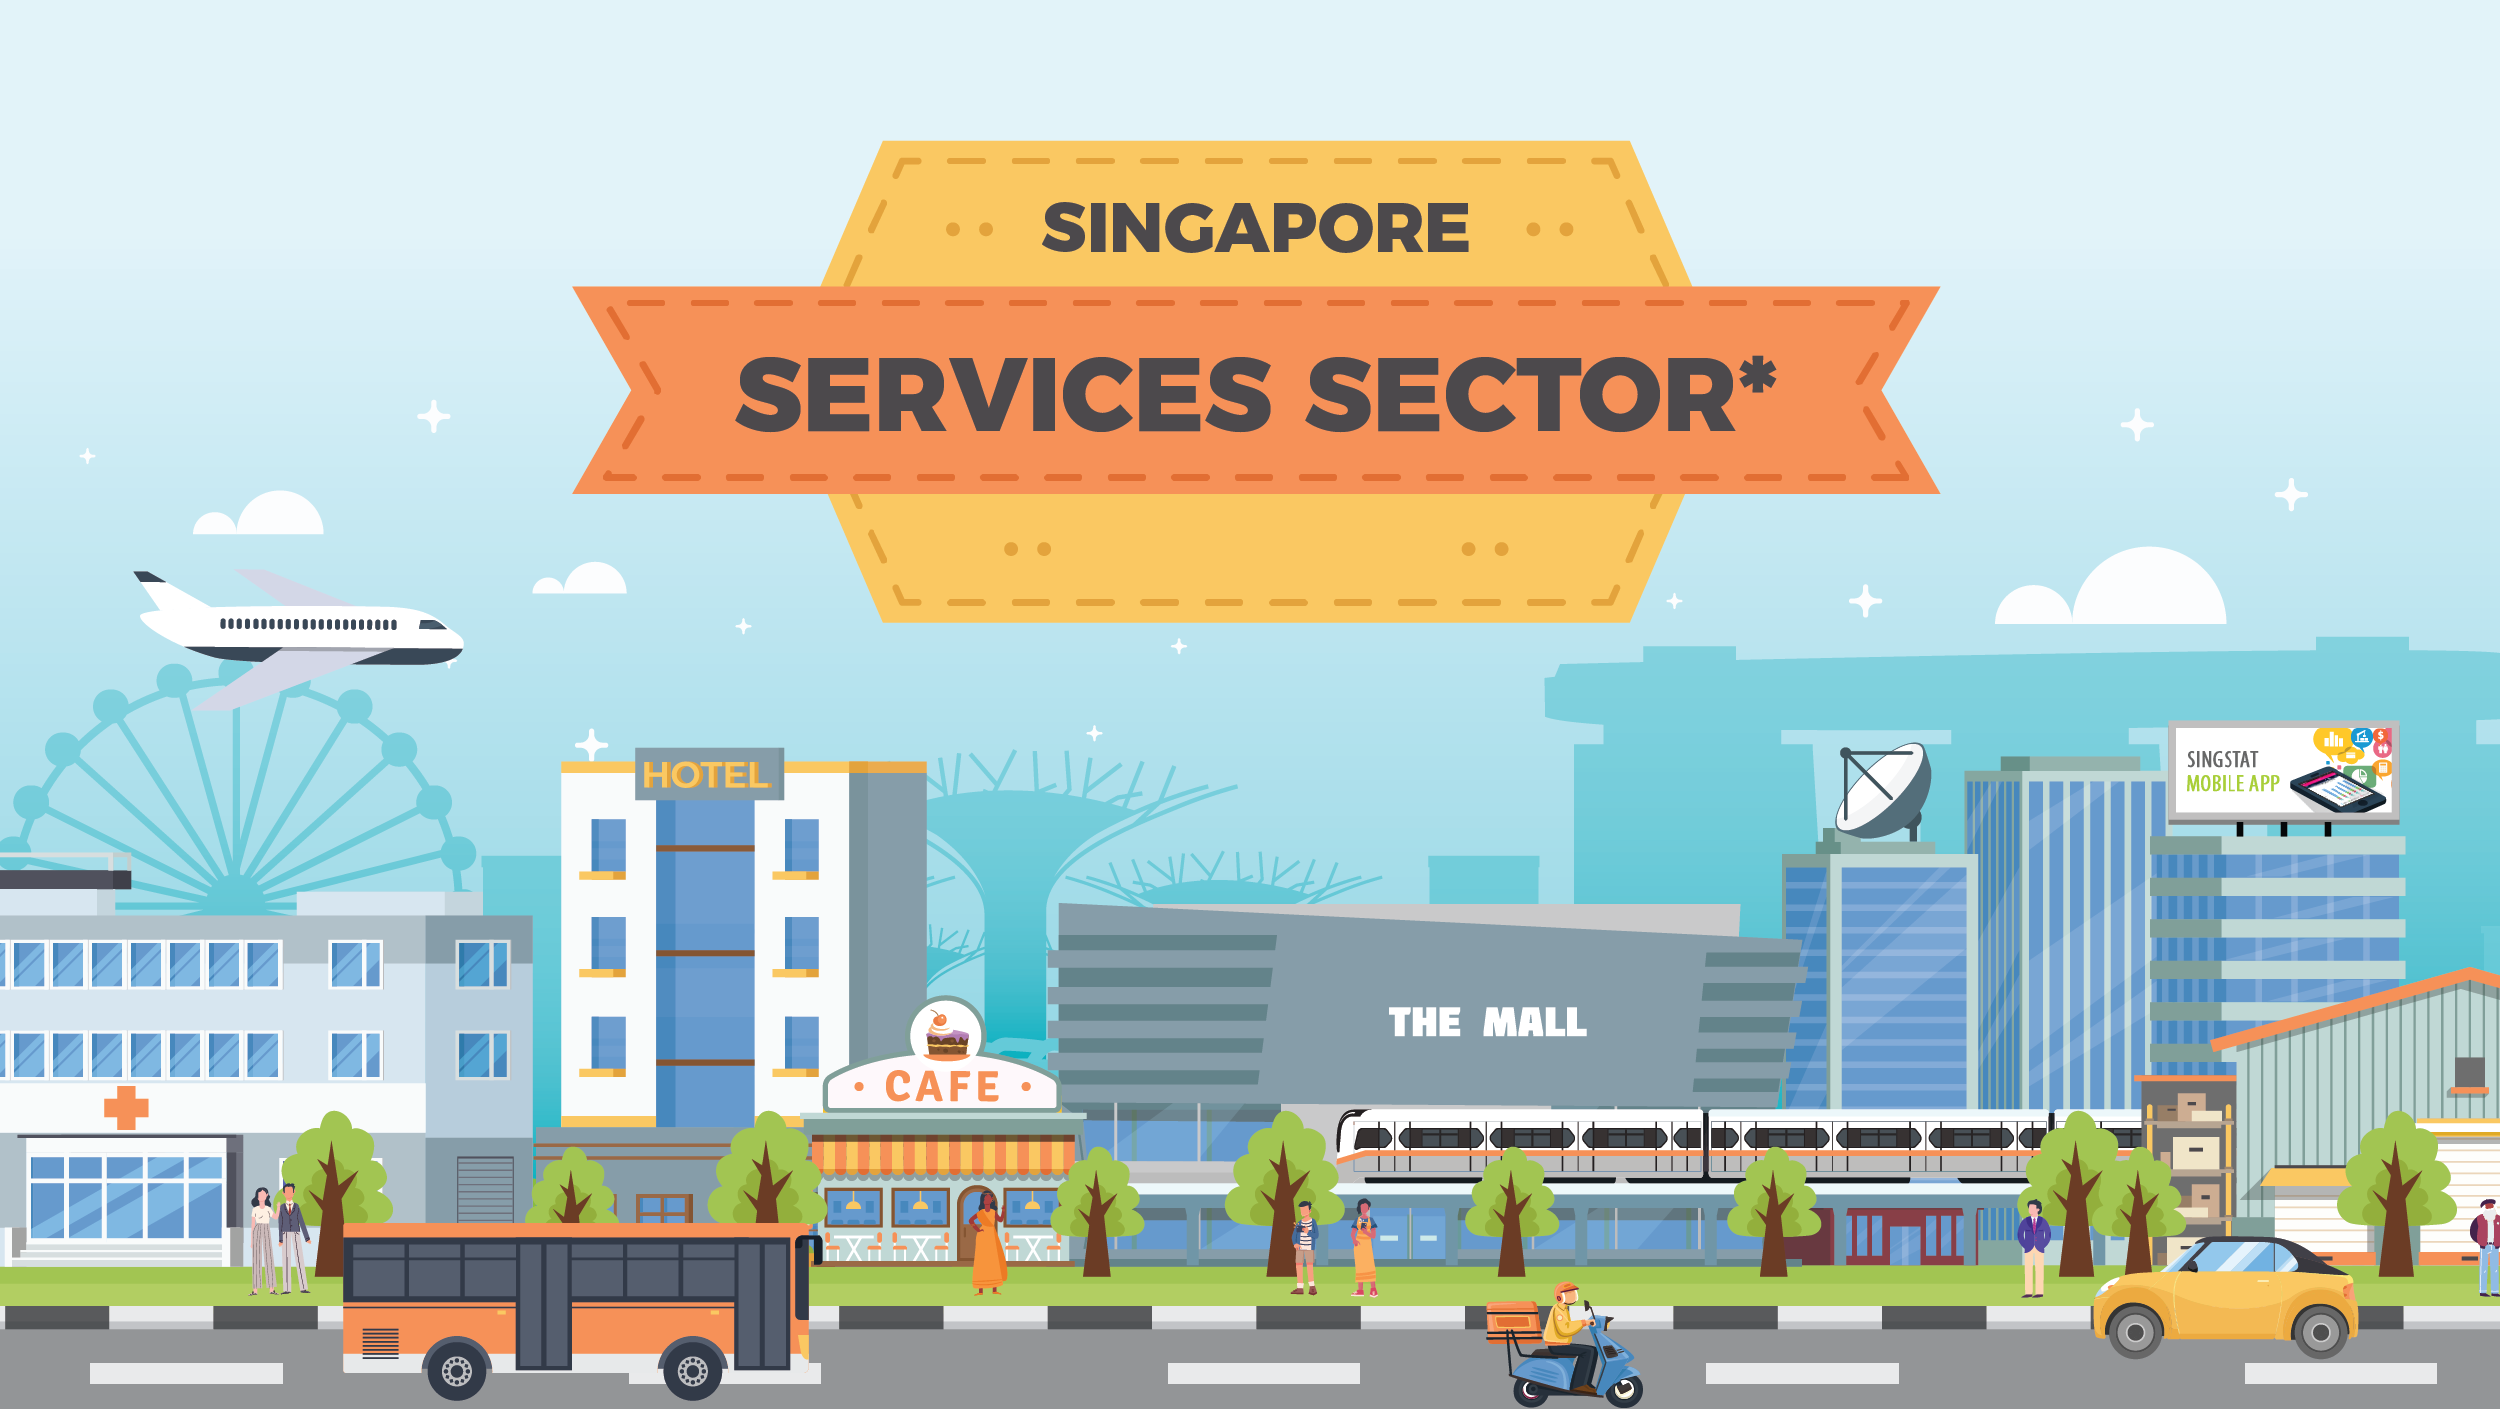 Singapore Services Sector 2022